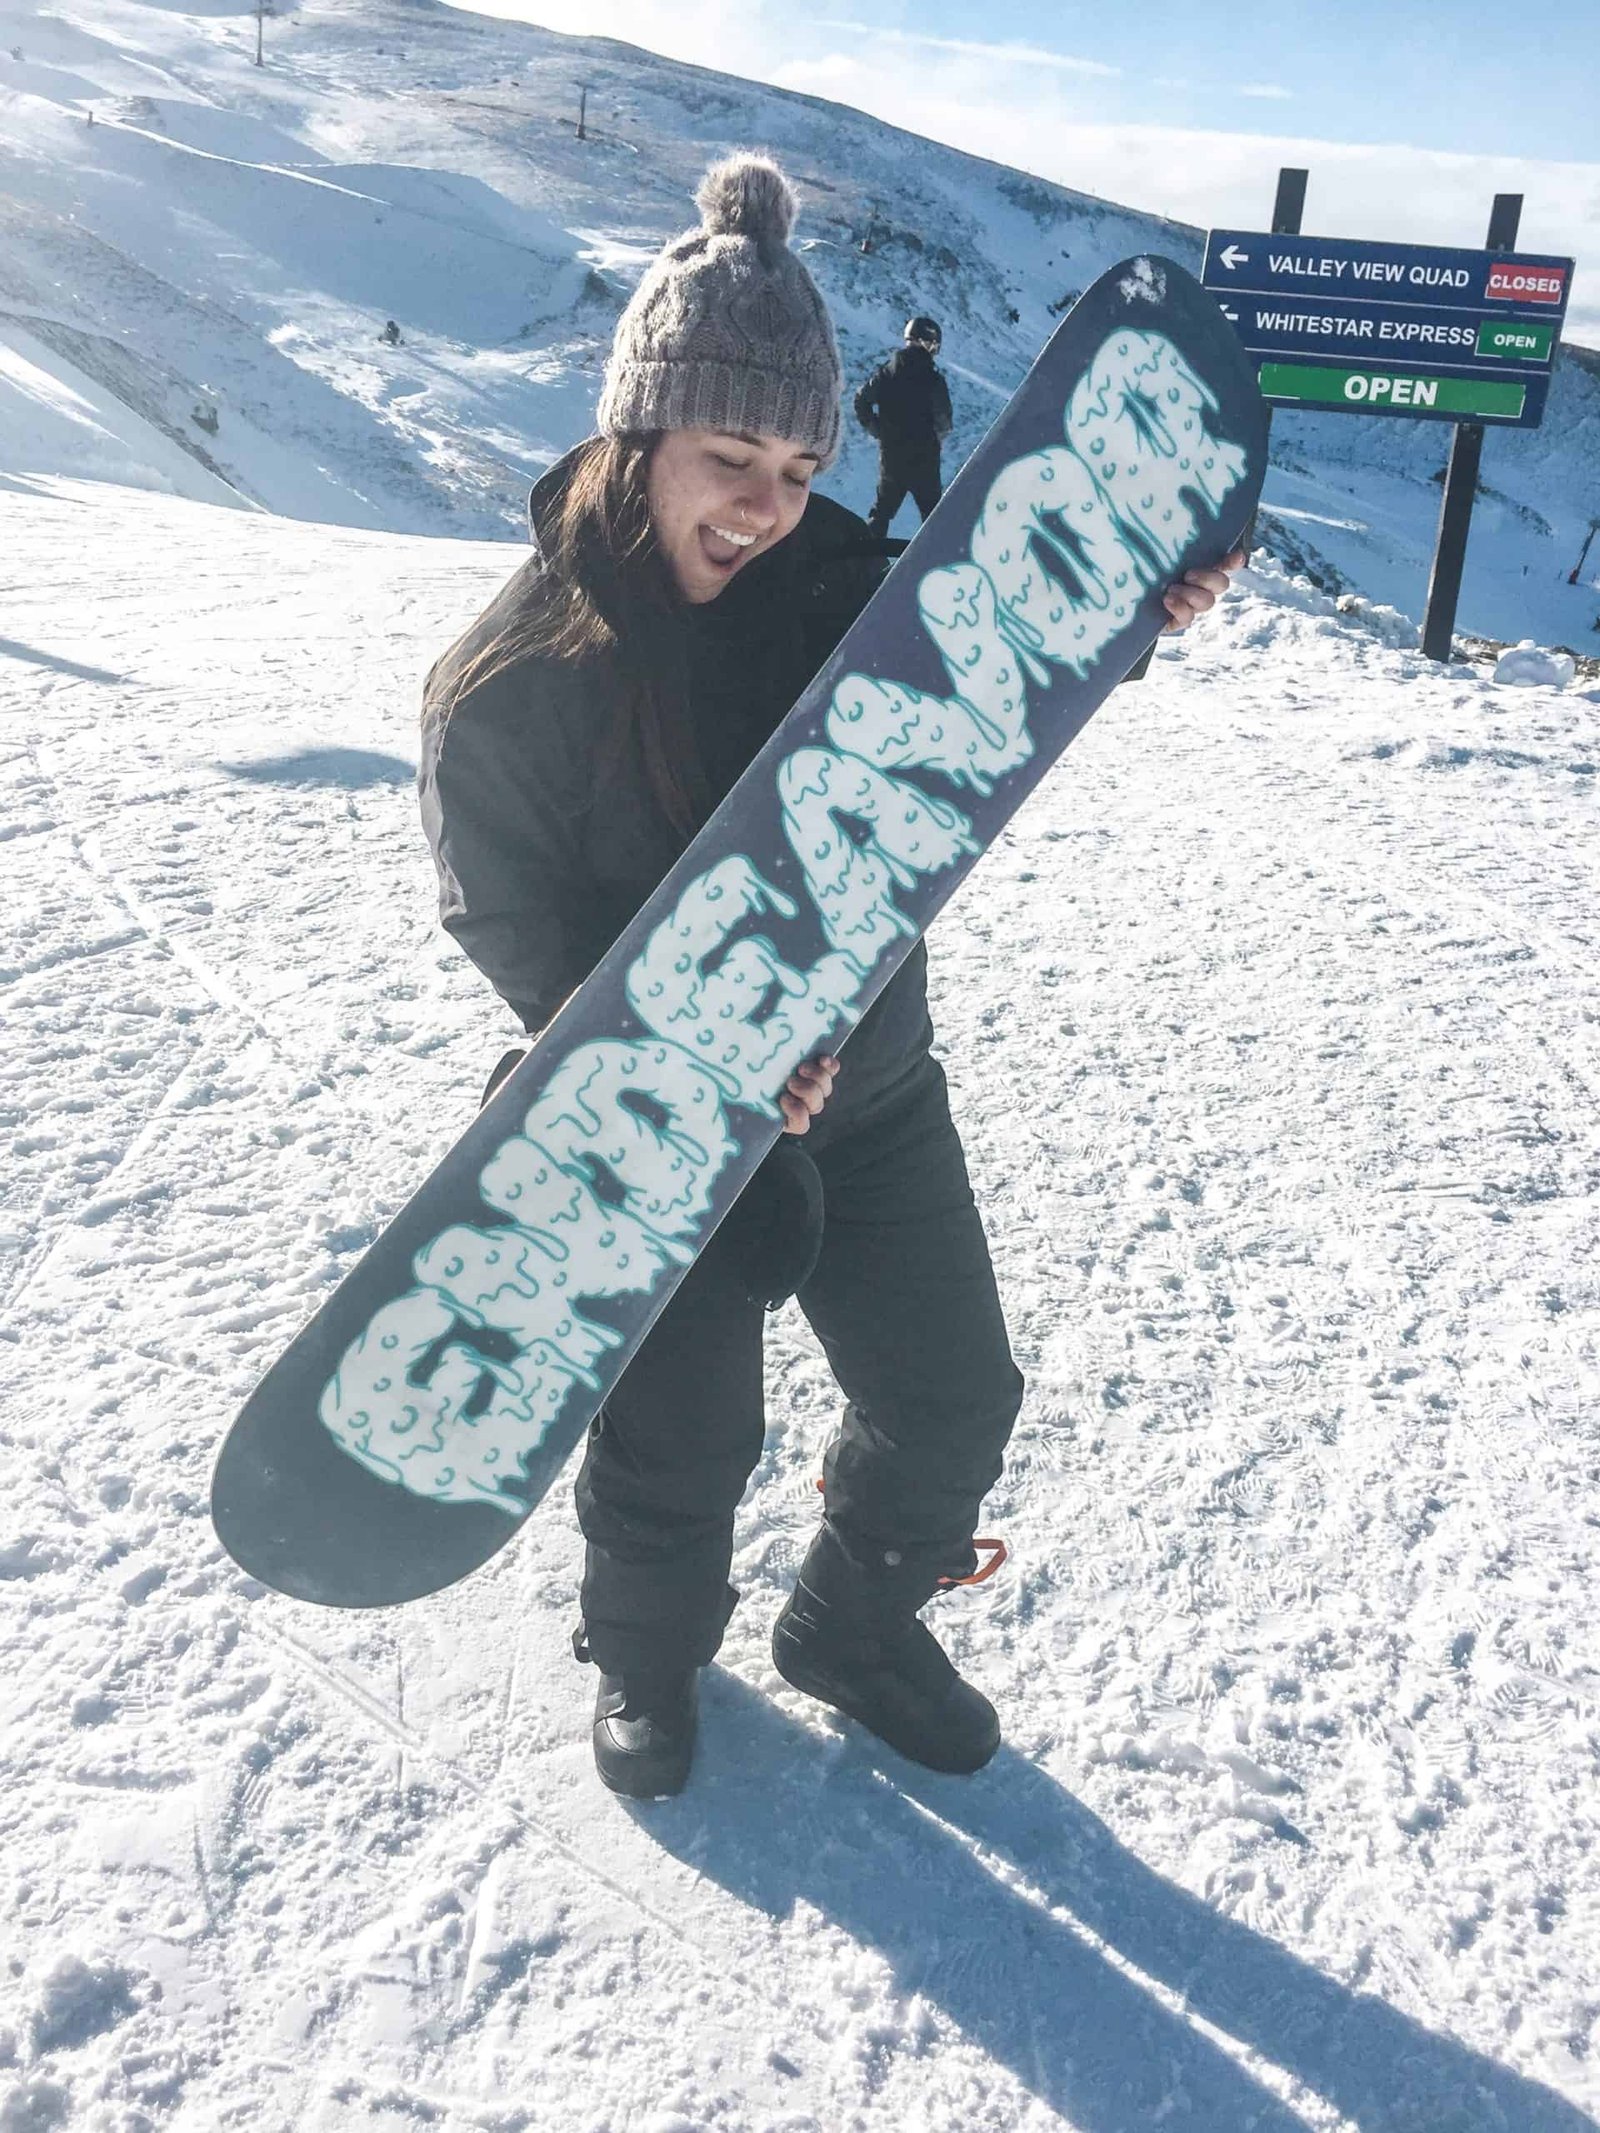 Skiing and snowboarding in New Zealand- your ultimate guide to the things to do, things to wear, which ski hills to visit, the ski-terminology to learn, and tips and tricks on the winter season in the New Zealand South Island! #skiing #wintertravel #newzealandtravel #queenstown